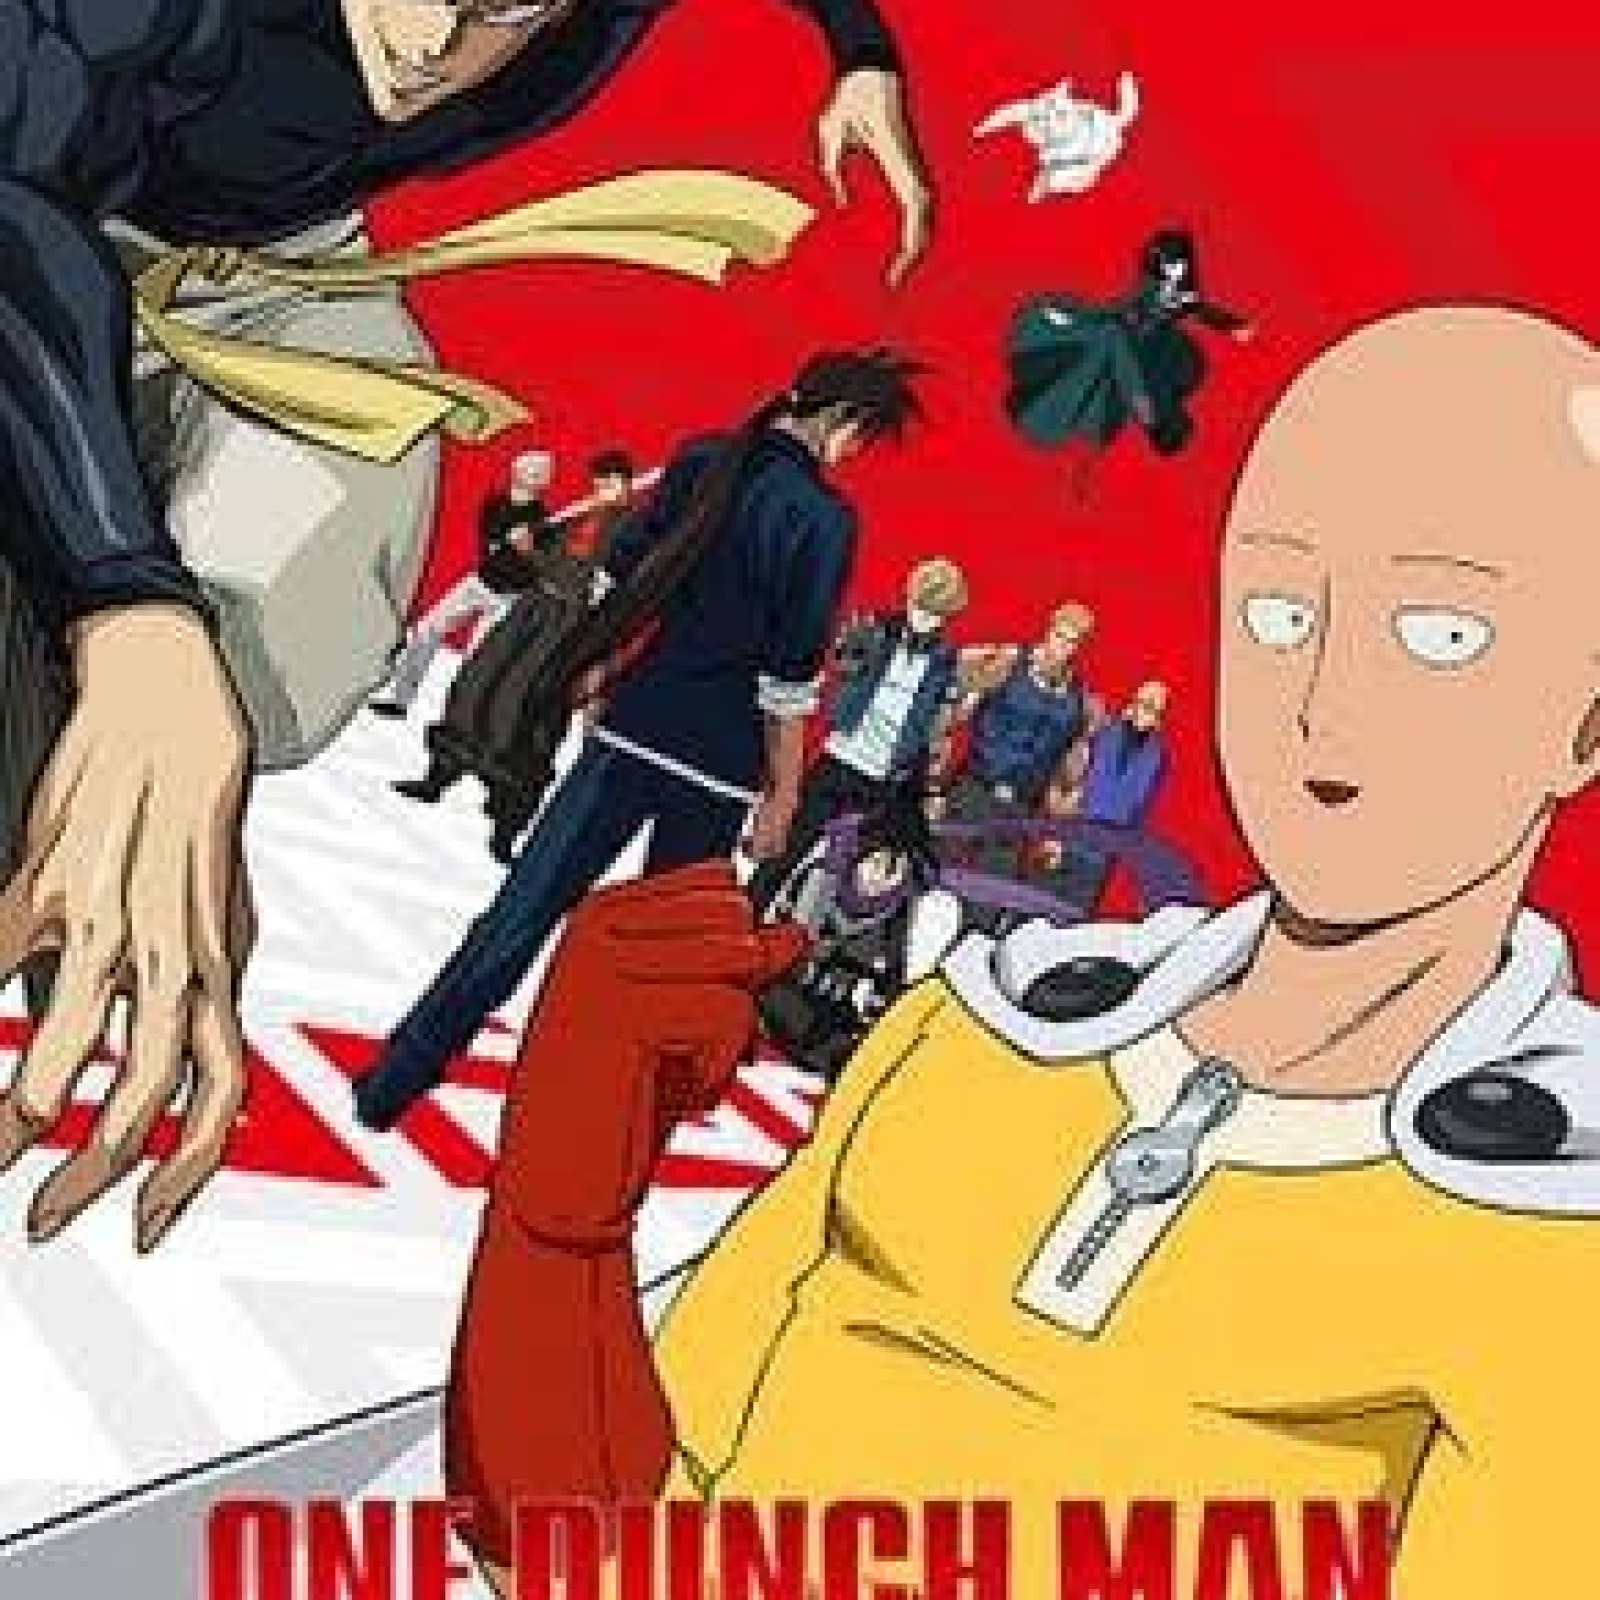 One-Punch Man' Season 2: How to Watch Online